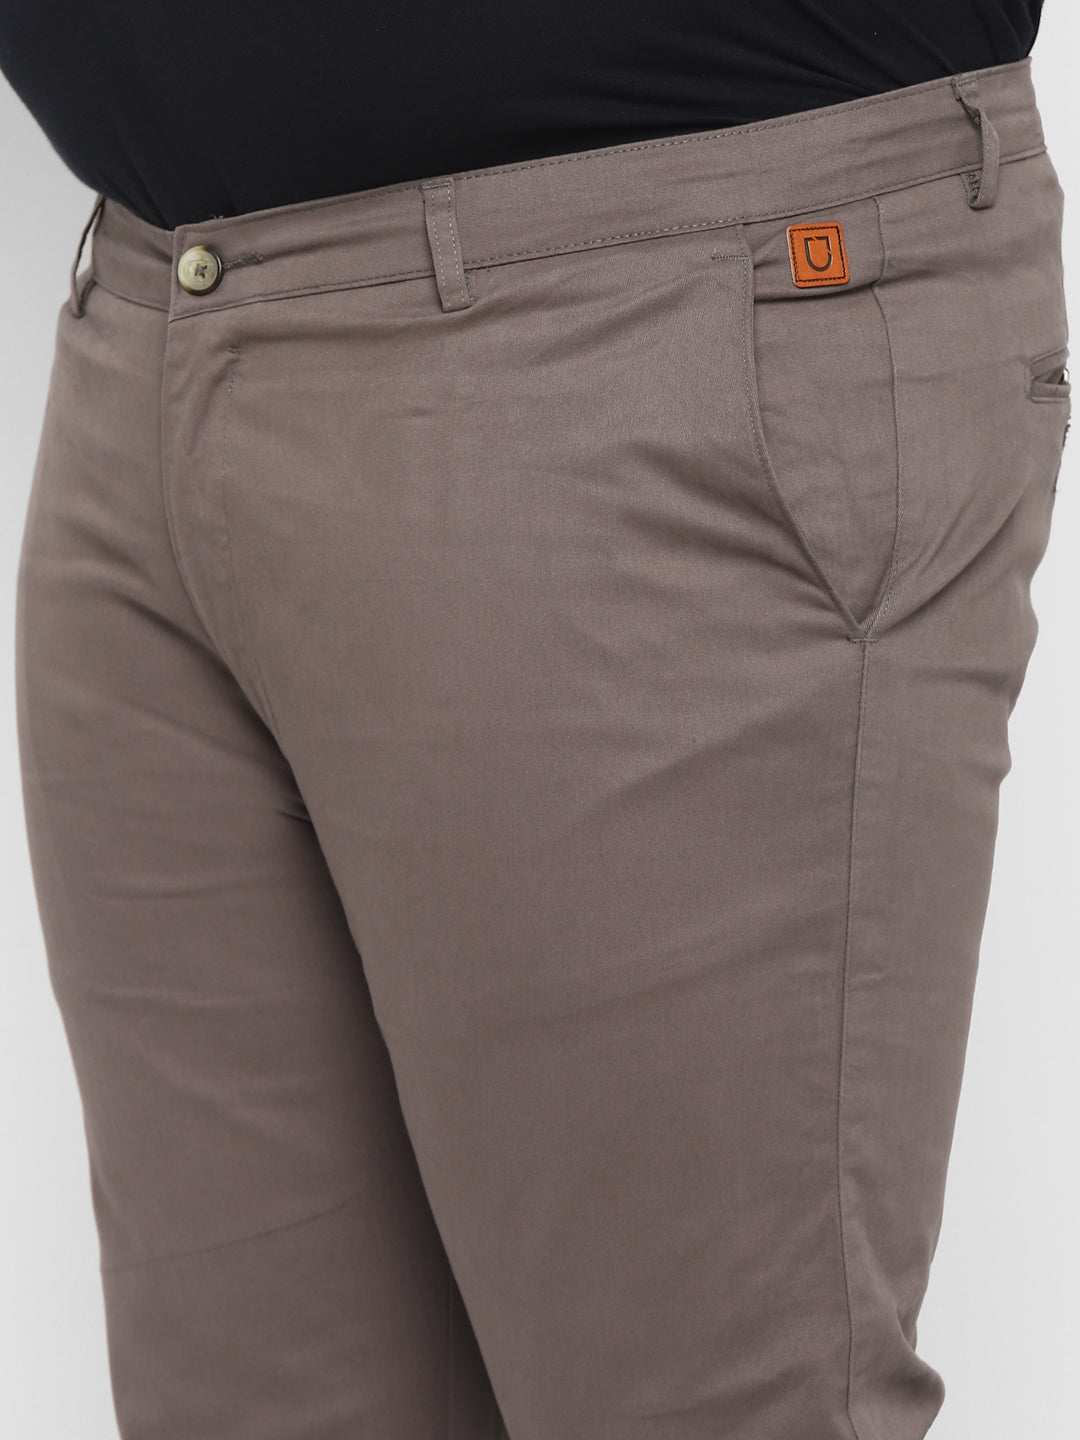 Plus Men's Dark Grey Cotton Regular Fit Casual Chinos Trousers Stretch